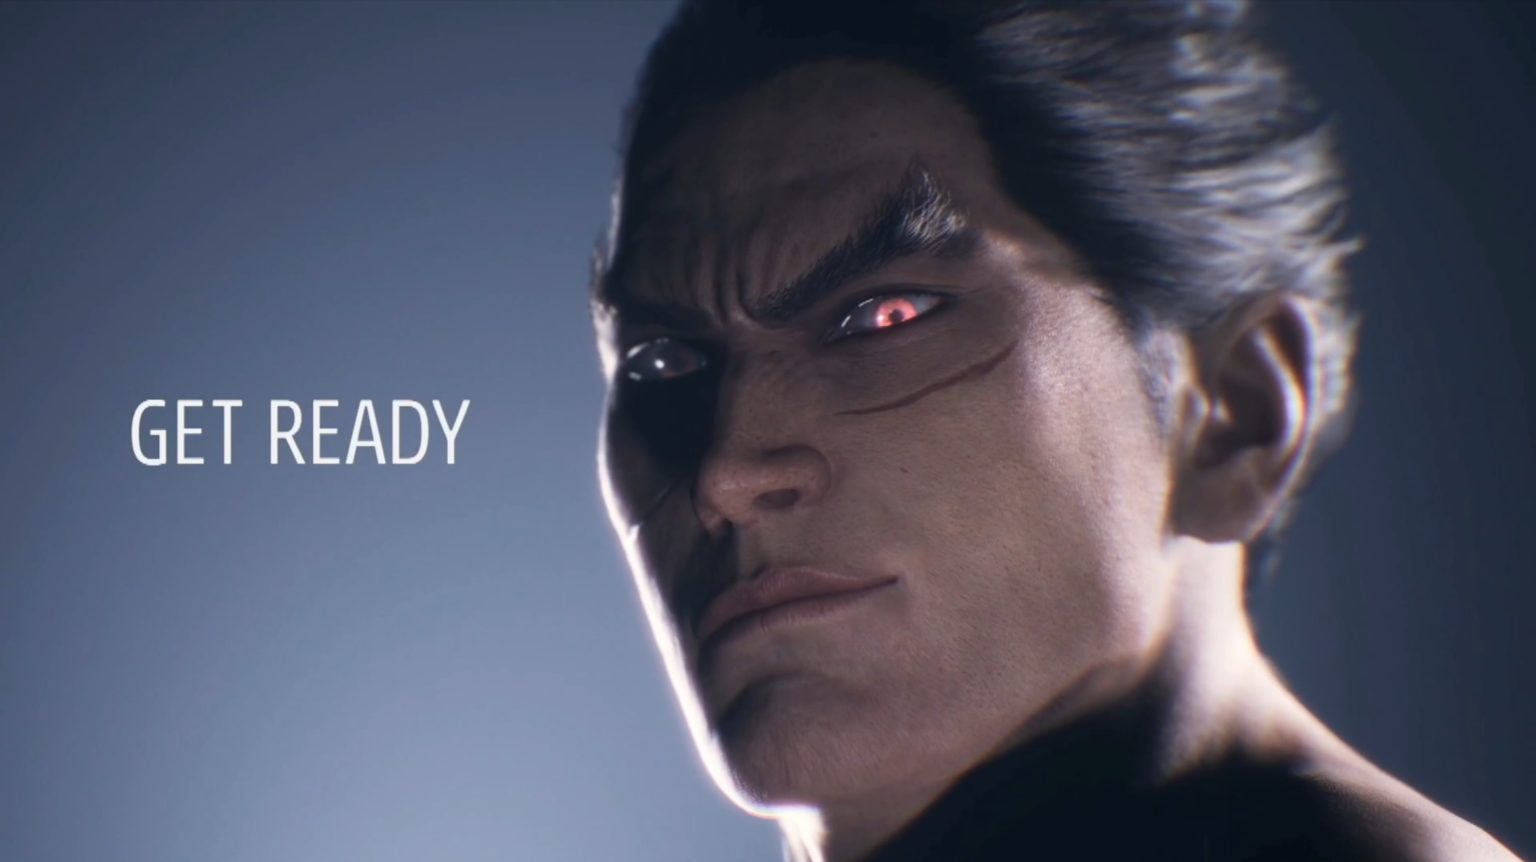 After Tekken top 8, Namco Bandai dropped a teaser trailer for the possible new entry to the Tekken franchise